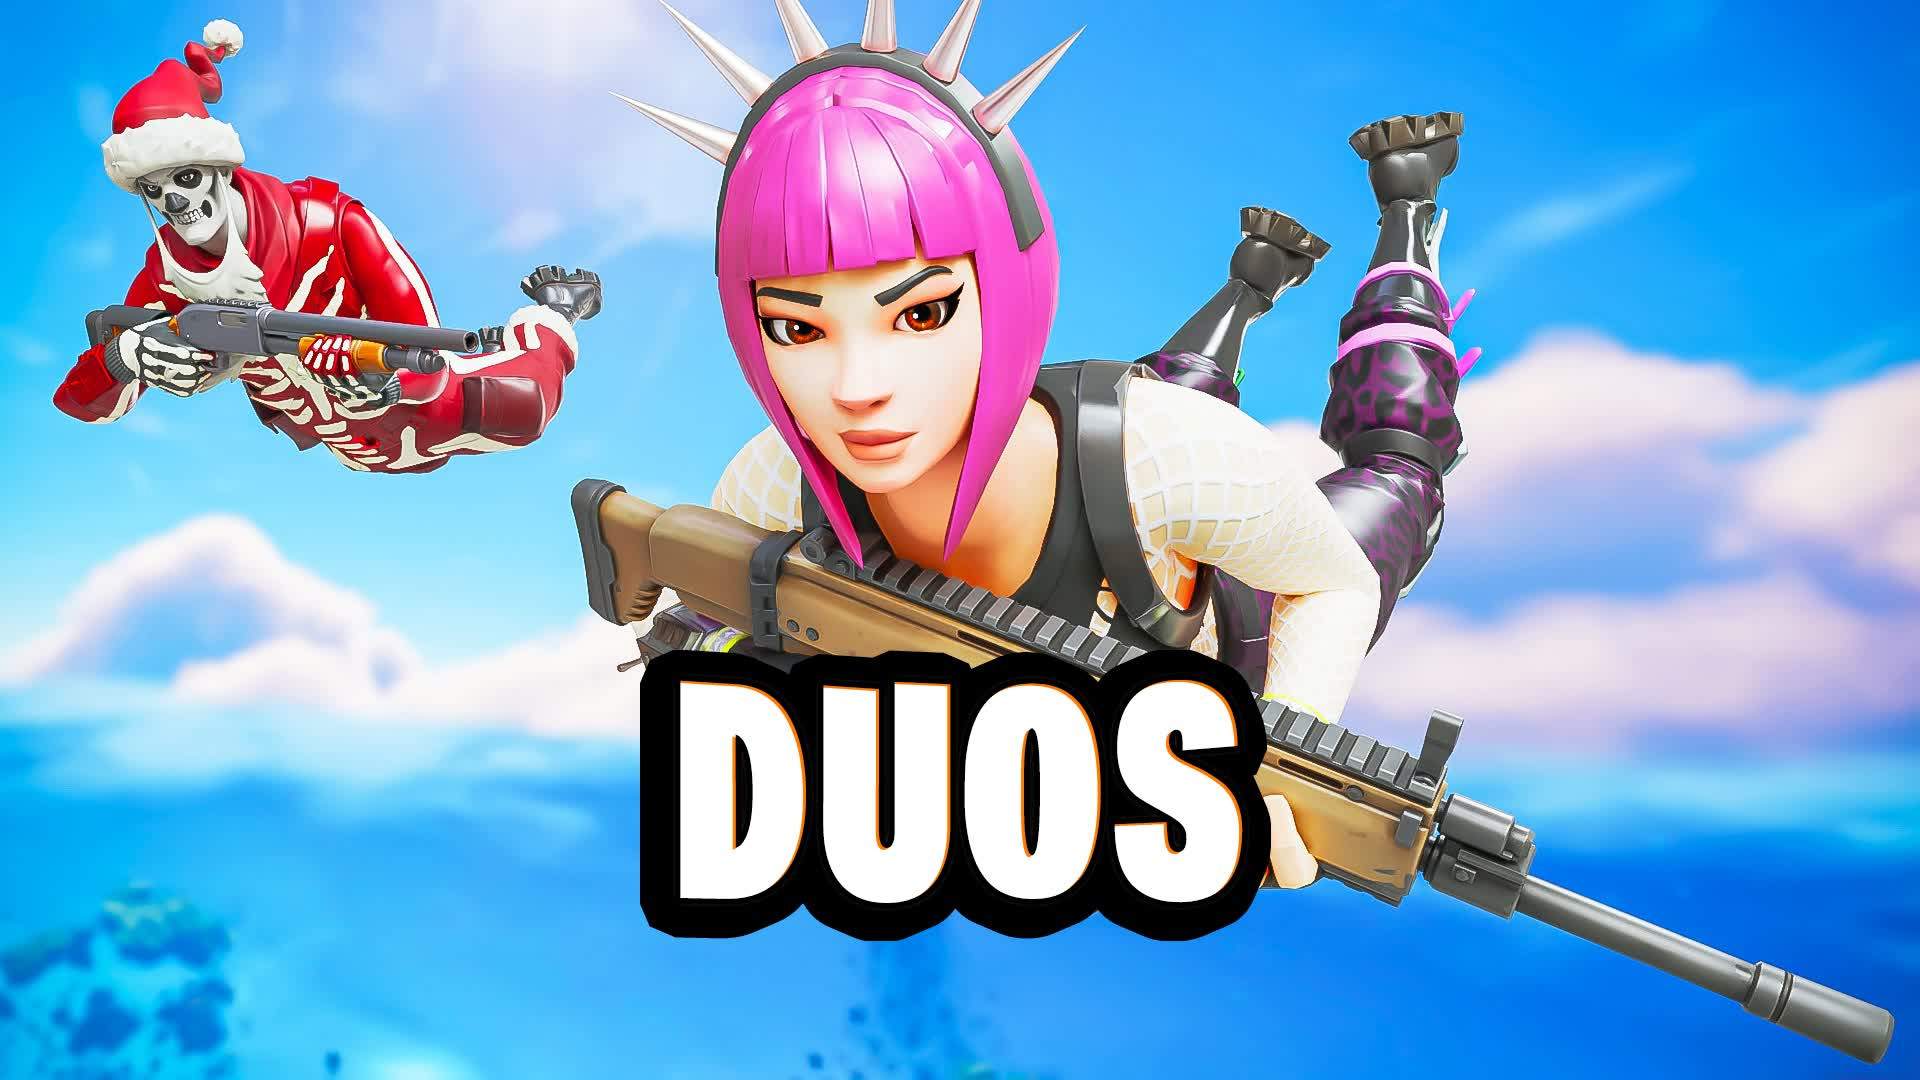 DESTROY'S LATE GAME SCRIMS (DUOS)